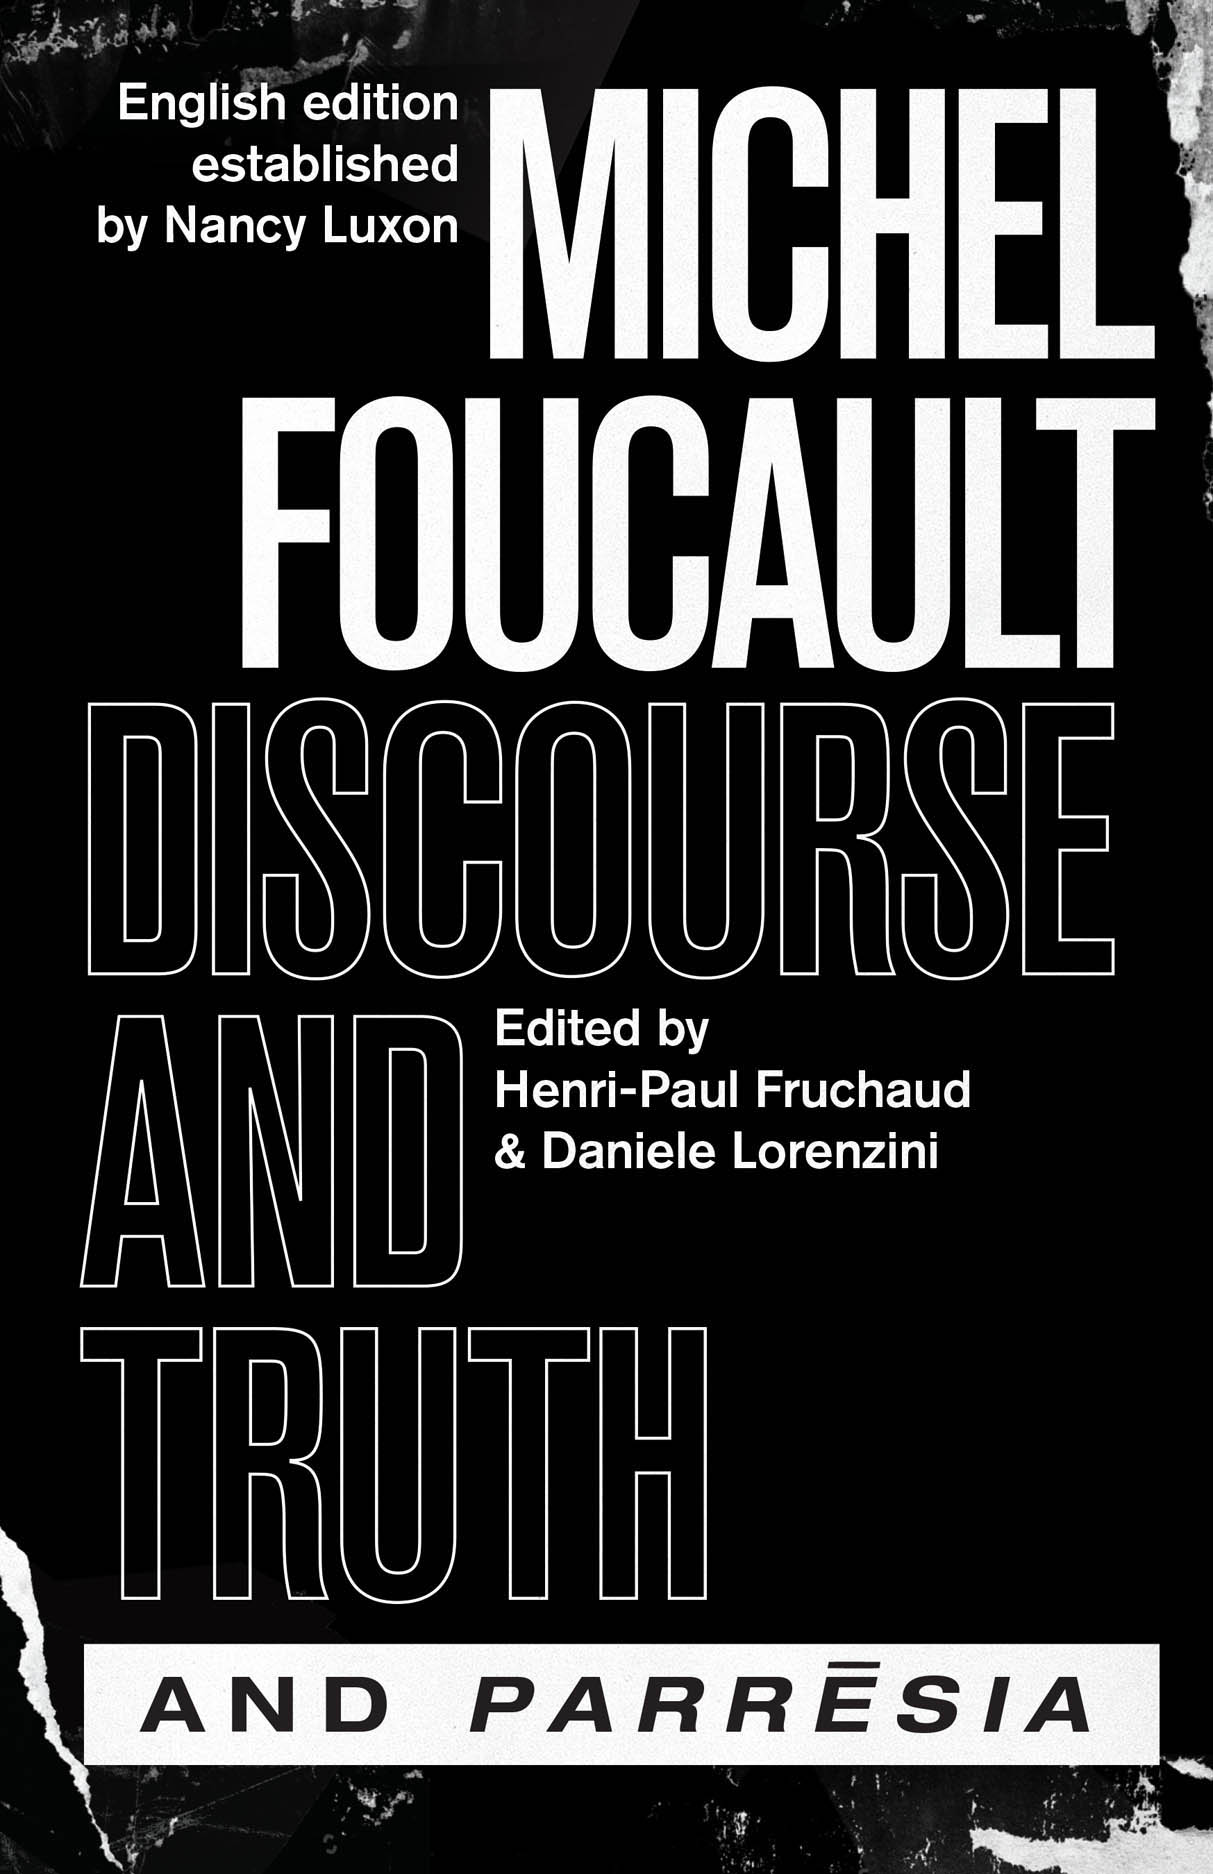 "Discourse and Truth" and "Parresia" Book Cover